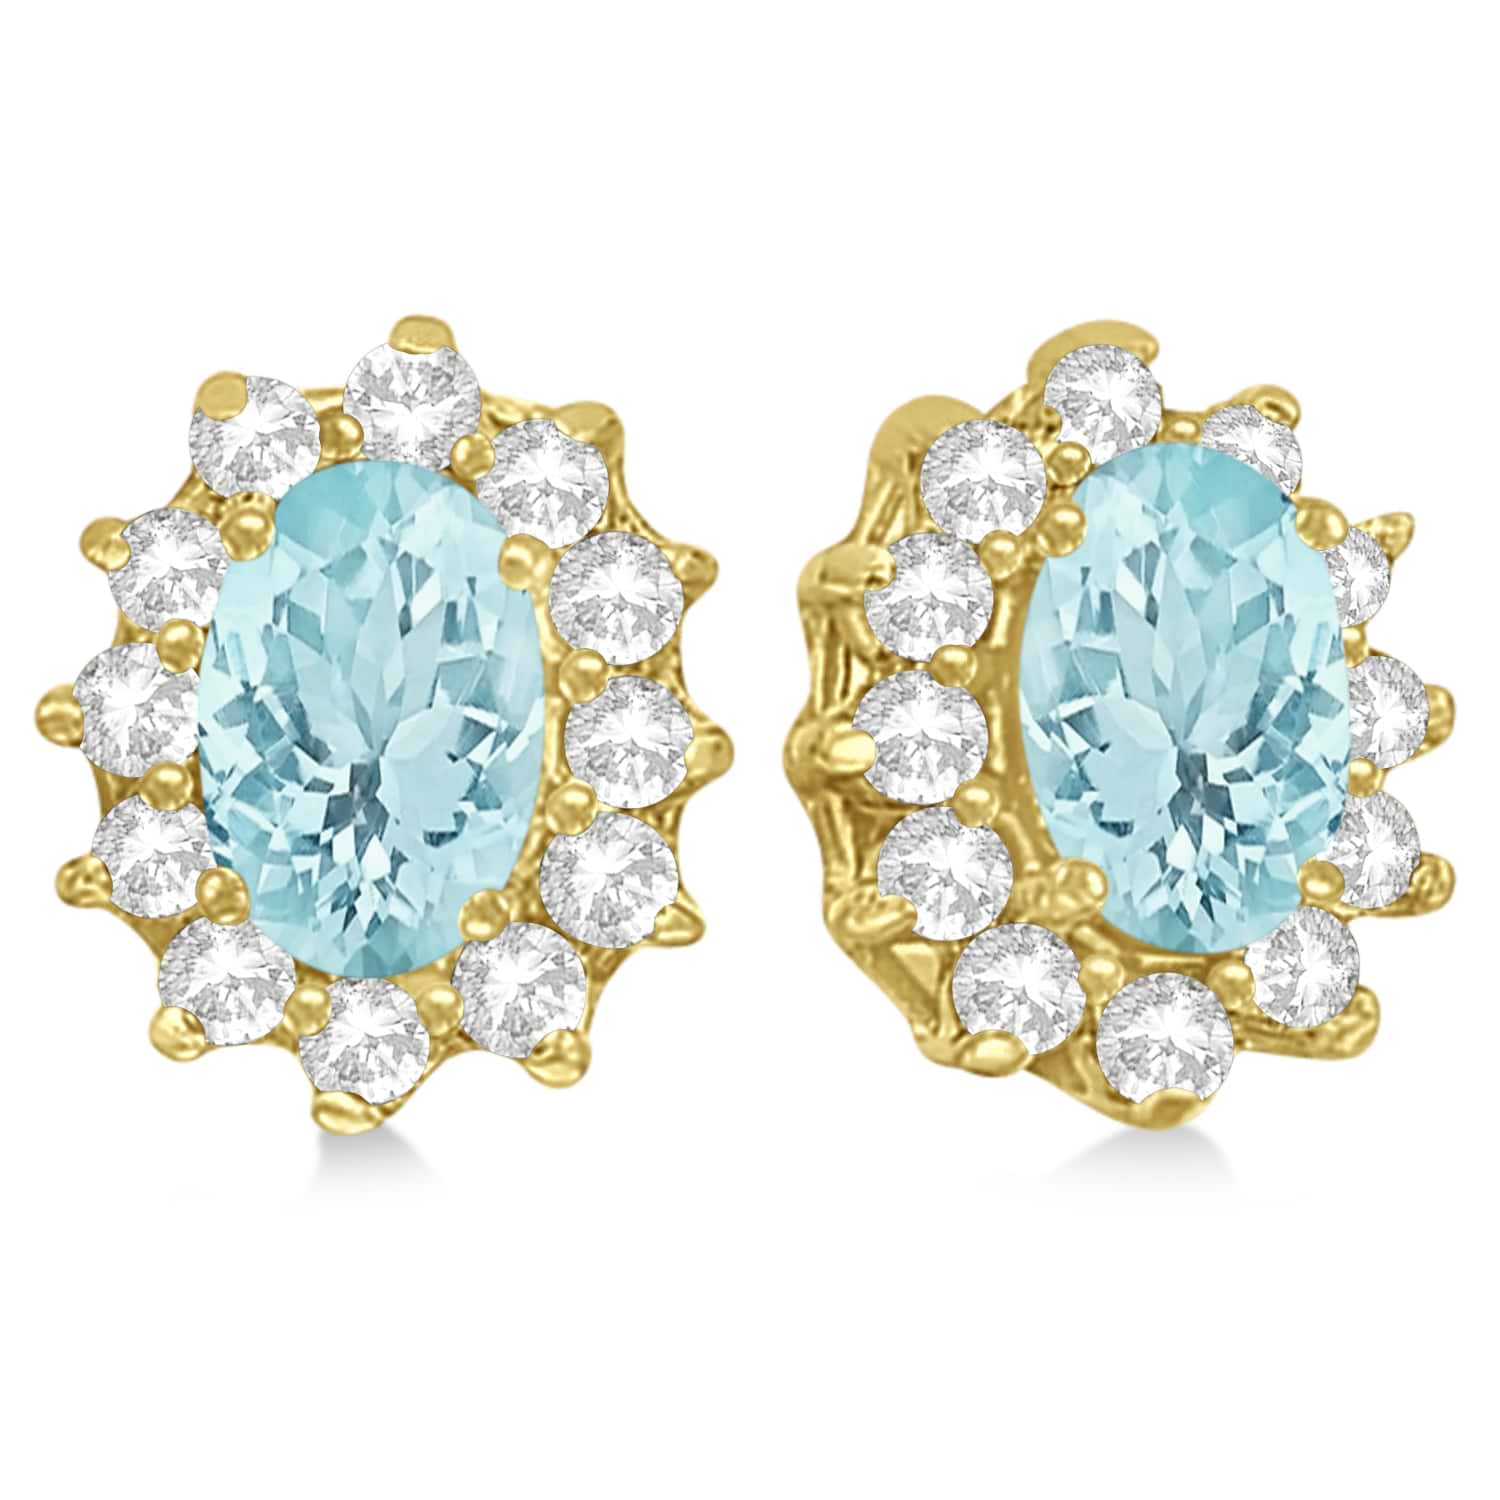 Oval Aquamarine & Diamond Accented Earrings 14k Yellow Gold (2.05ct)